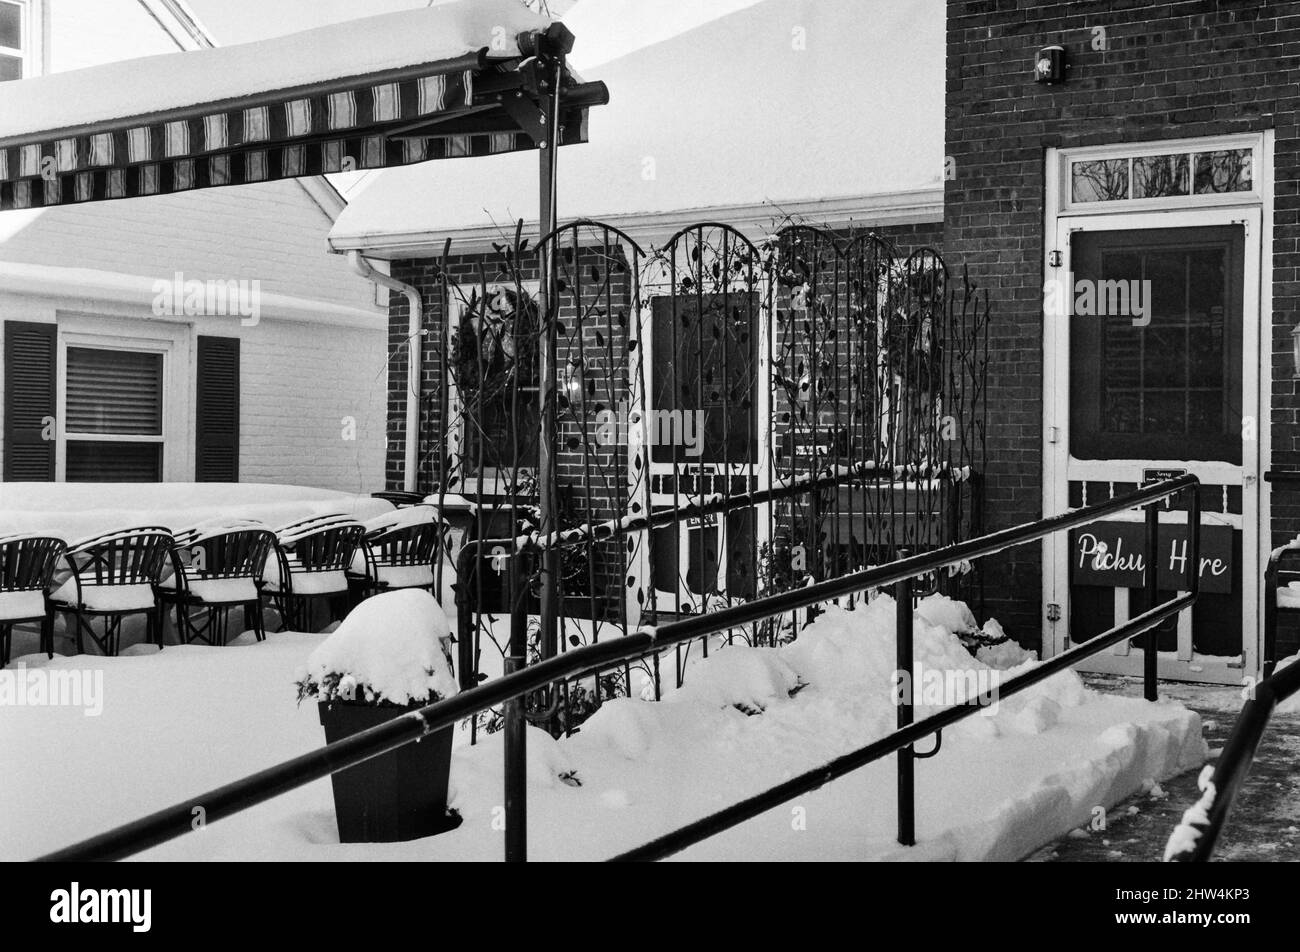 Outdoor restaurant seating area covered in snow after a storm.fg Stock Photo